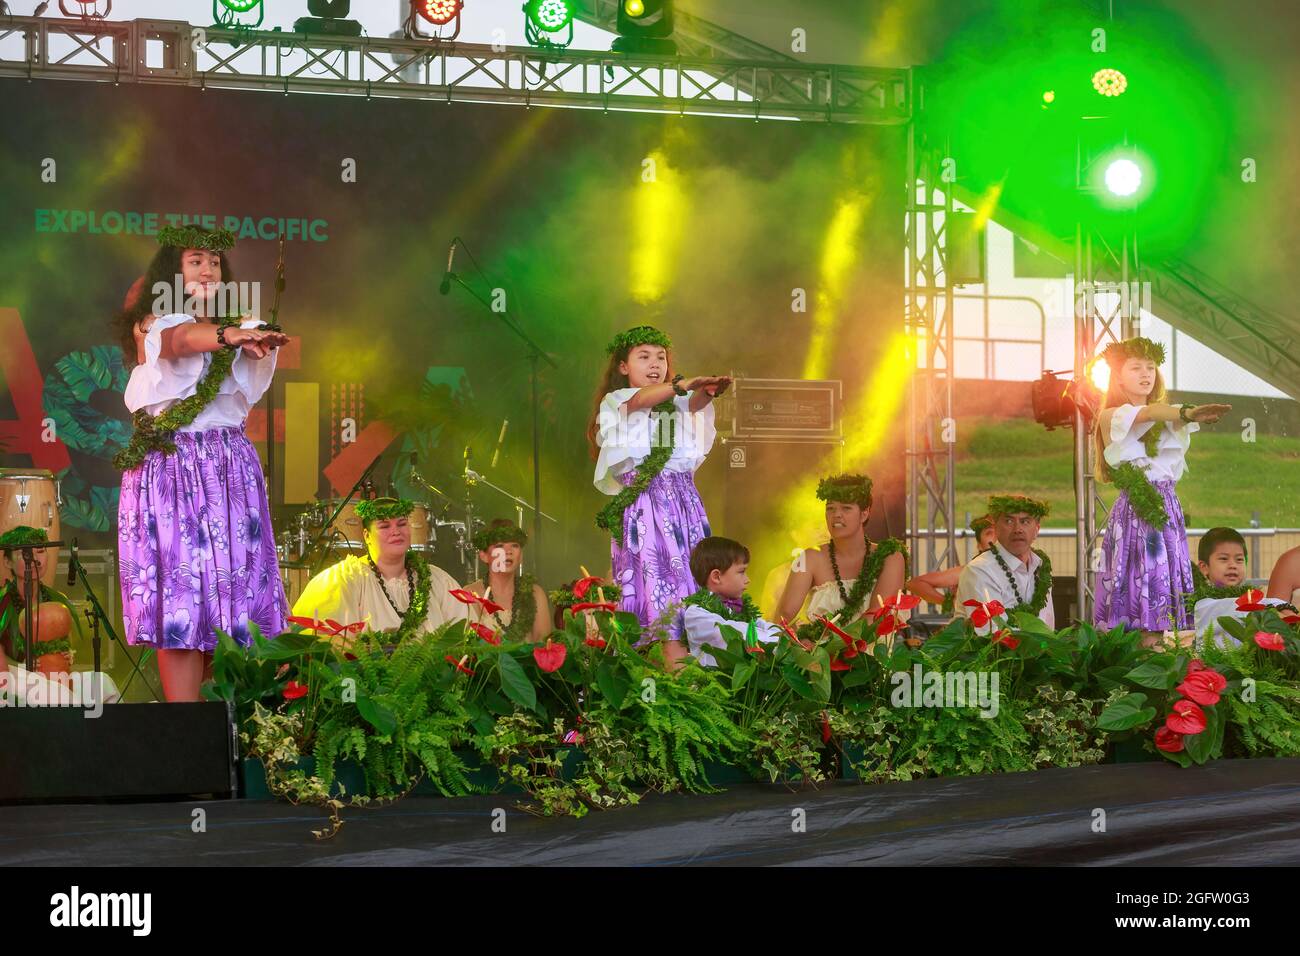 A group of Hawaiian girls dancing on stage at Pasifika Festival, a celebration of Pacific Island culture in Auckland, New Zealand Stock Photo